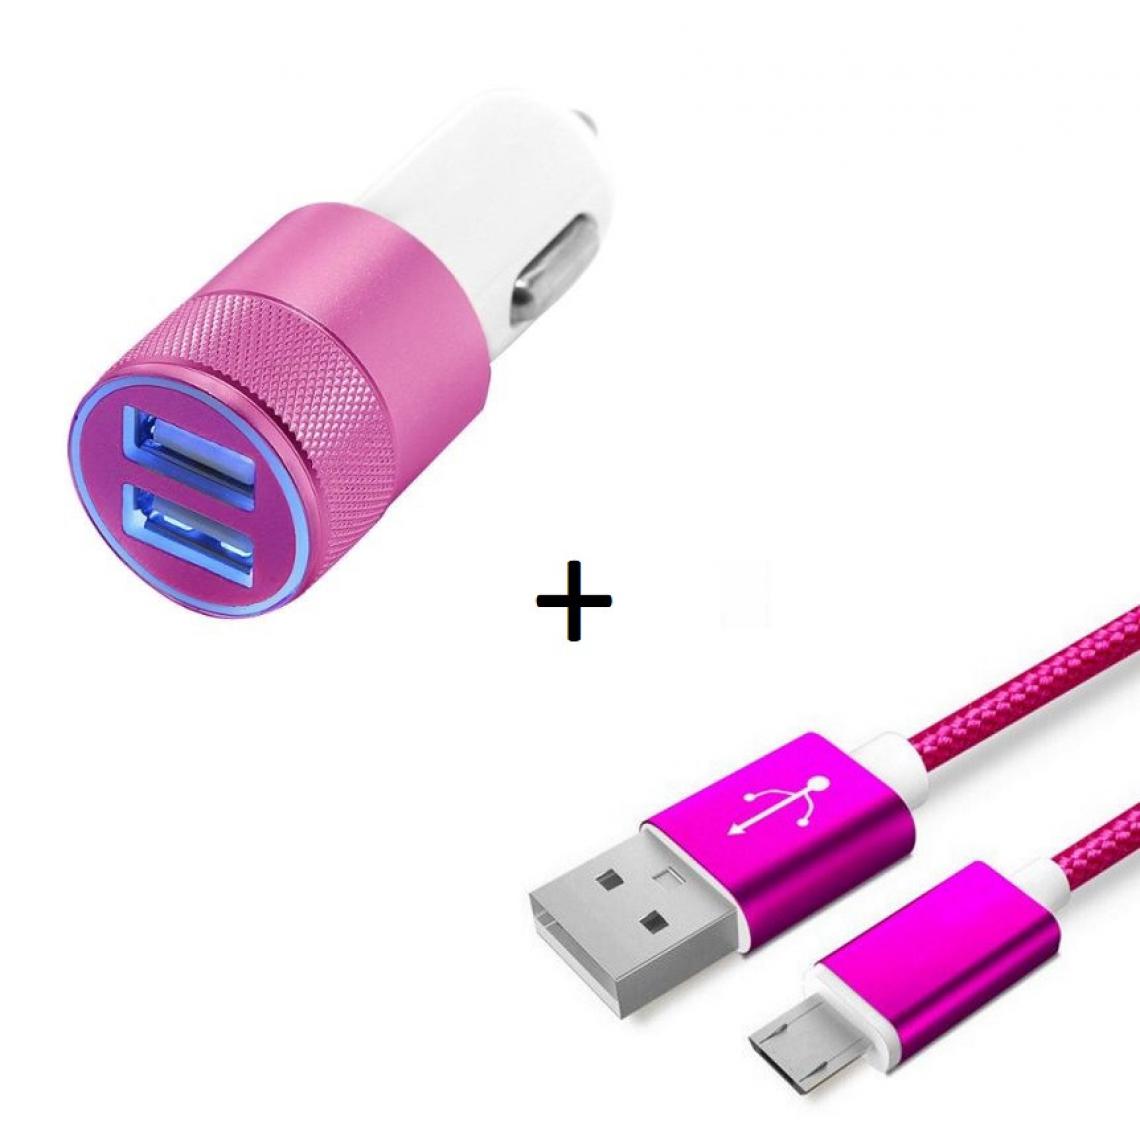 Shot - Pack Chargeur Voiture pour GIONEE F9 Smartphone Micro USB (Cable Metal Nylon + Double Adaptateur Allume Cigare) (ROSE) - Chargeur Voiture 12V